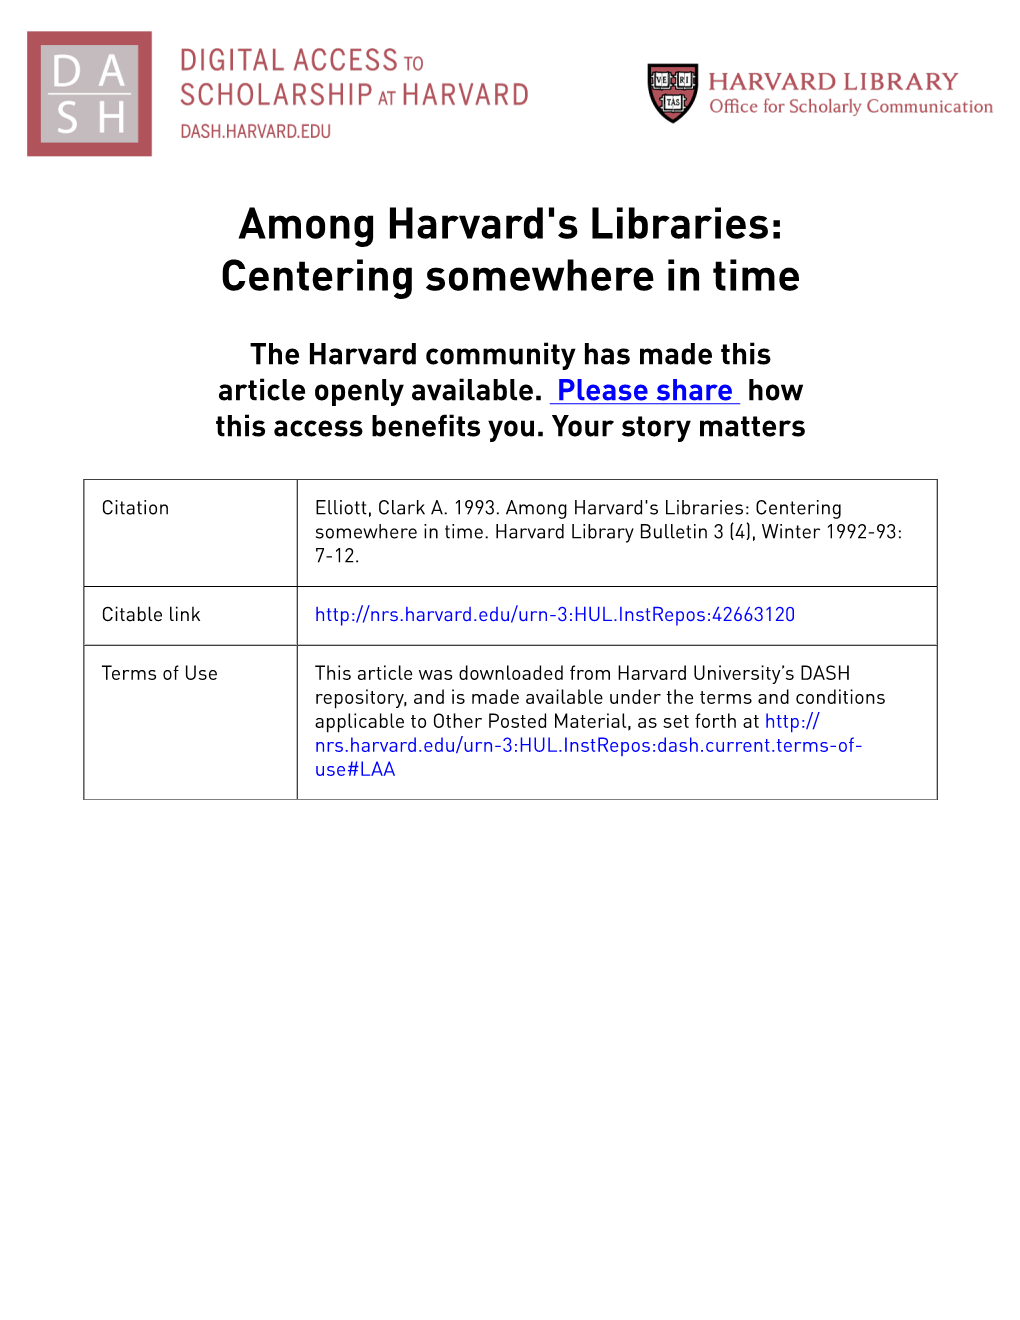 Among Harvard's Libraries: Centering Somewhere in Time